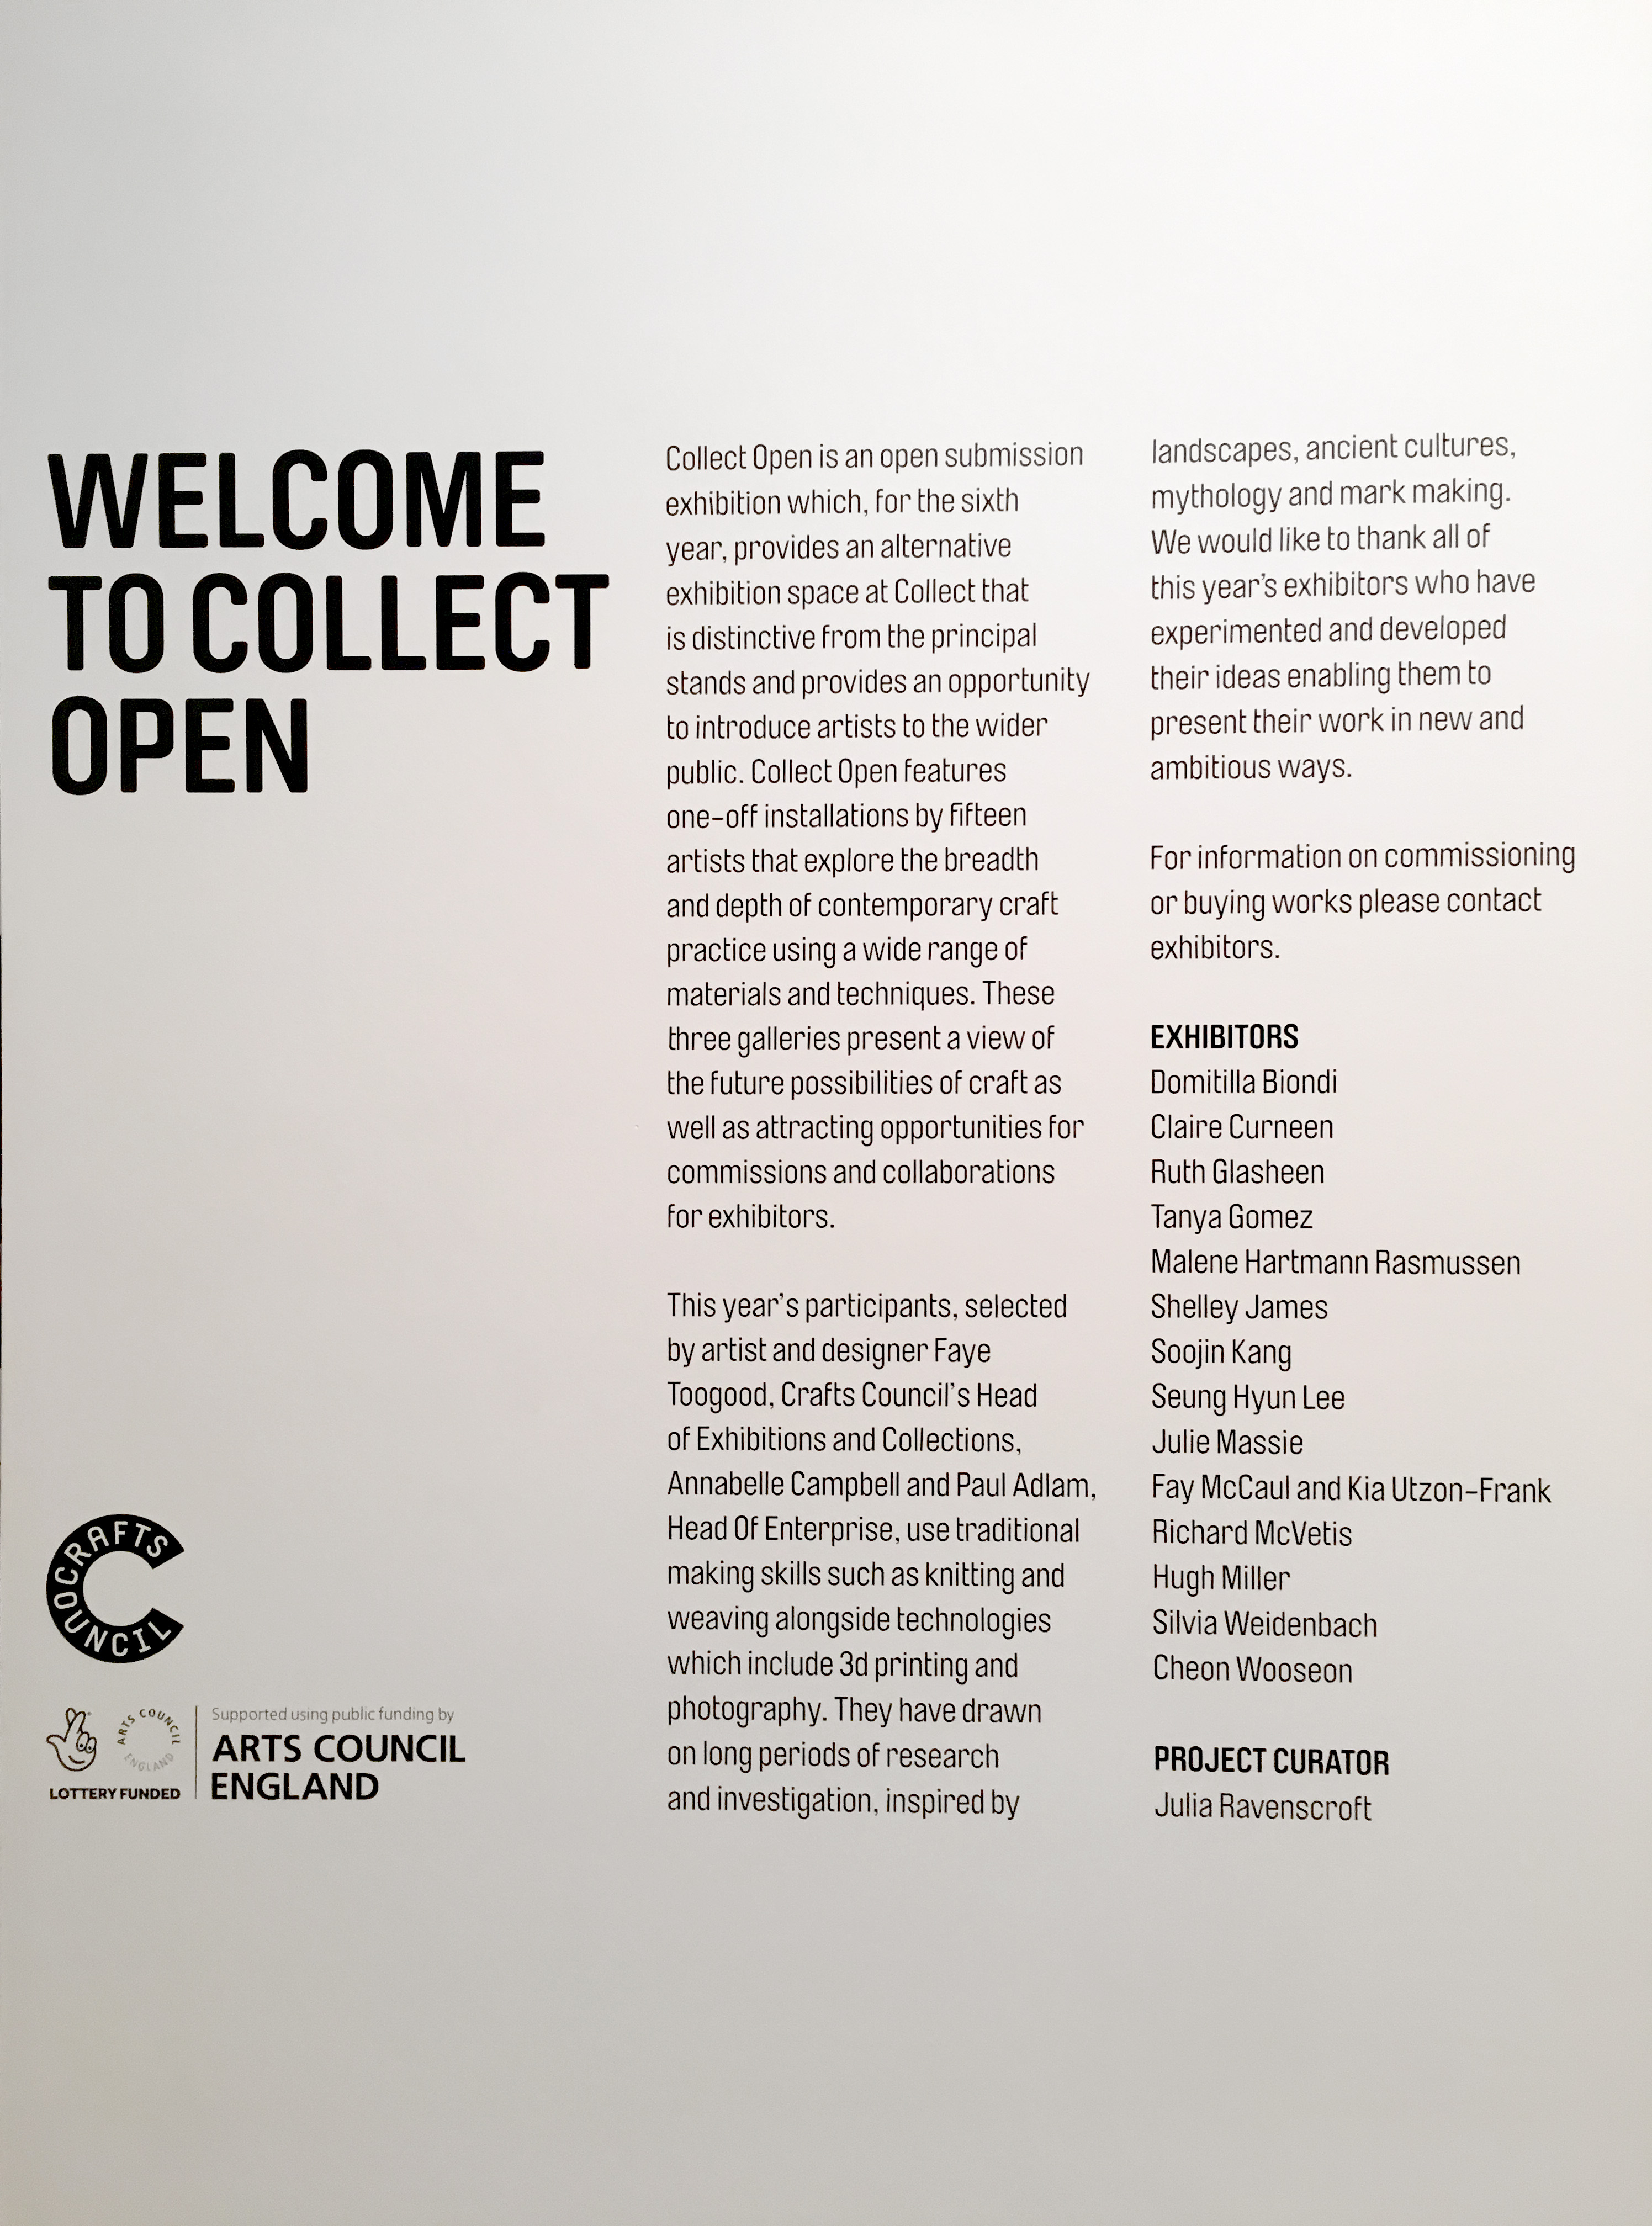 Collect Open 2017 @ Saatchi Gallery